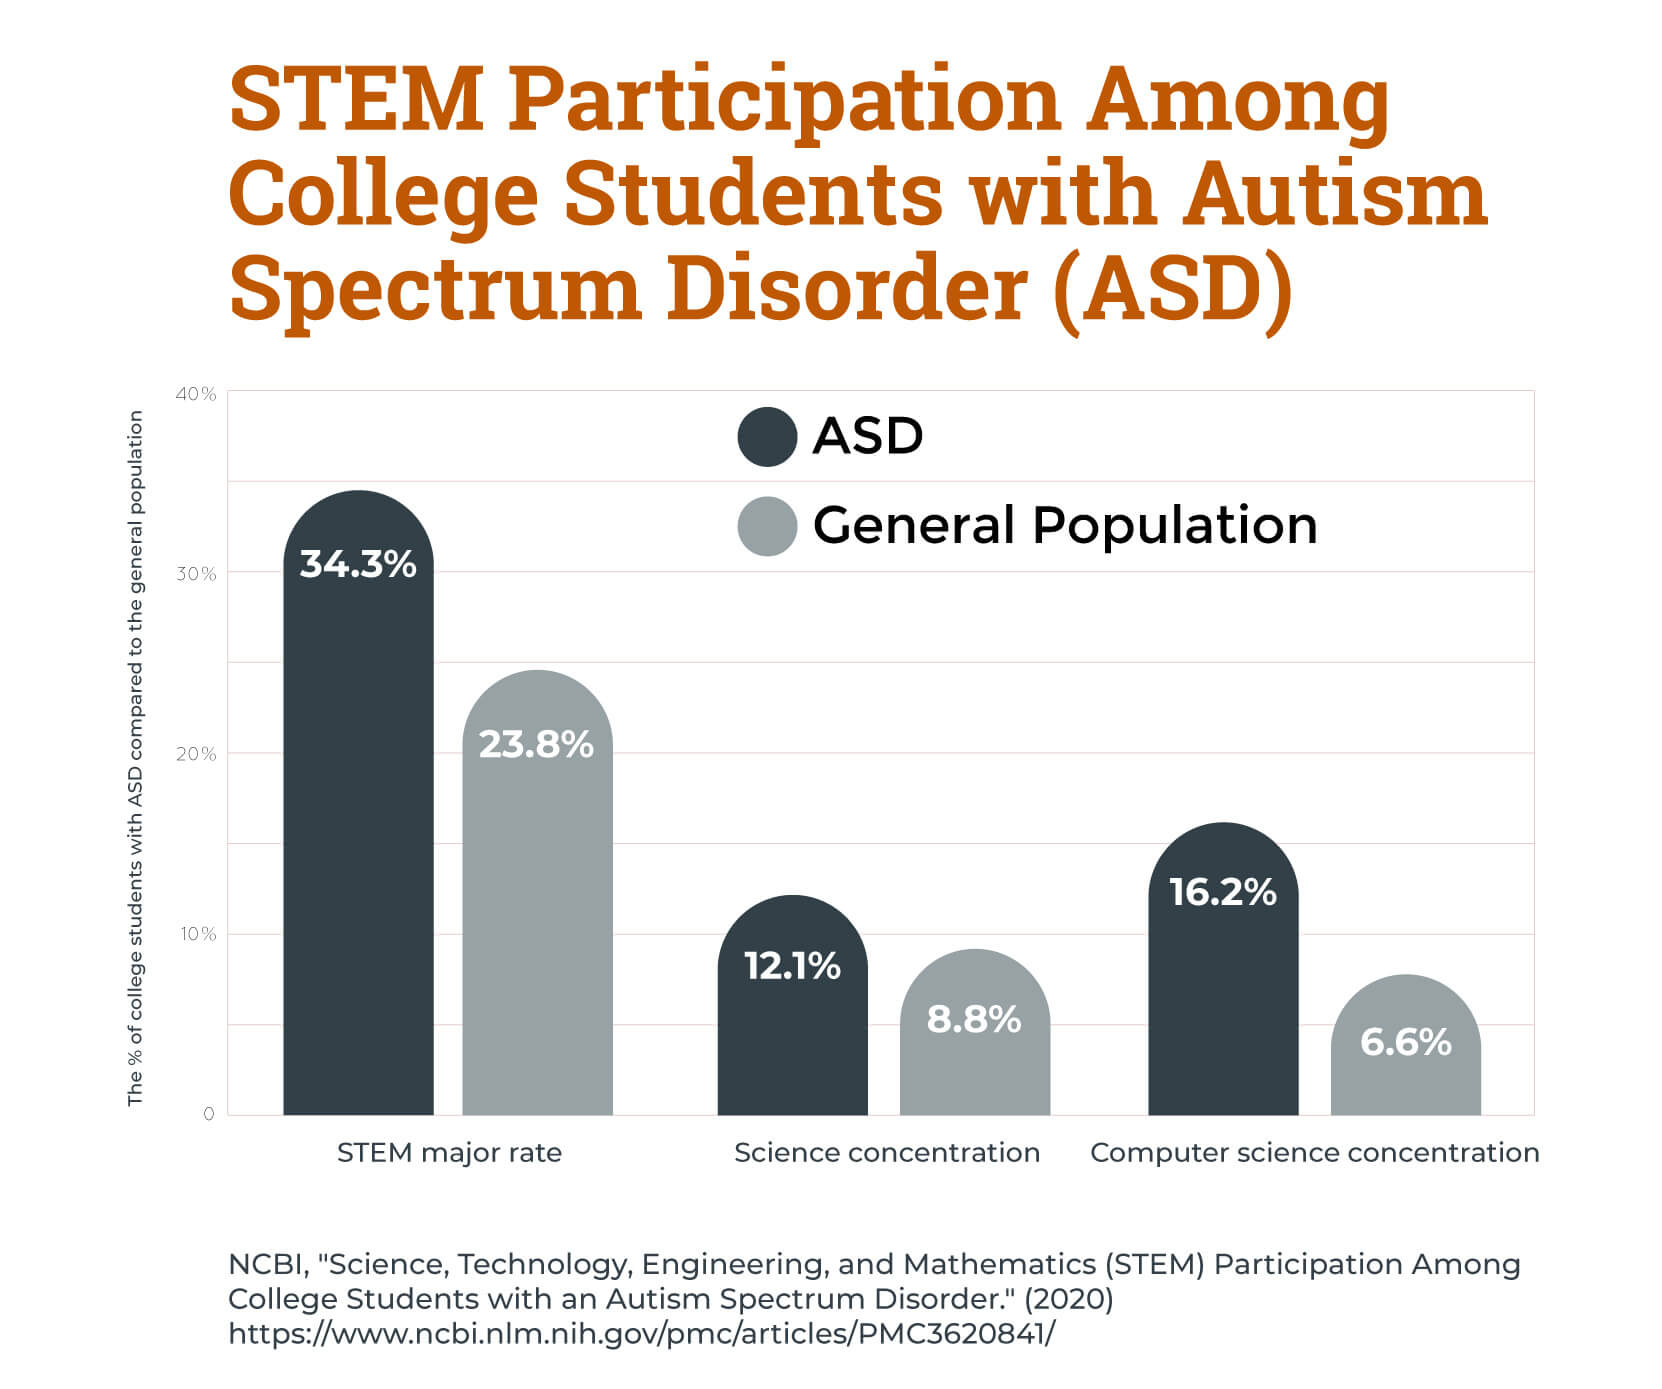 A chart showing STEM participation rates among college students with autism compared to the general population.